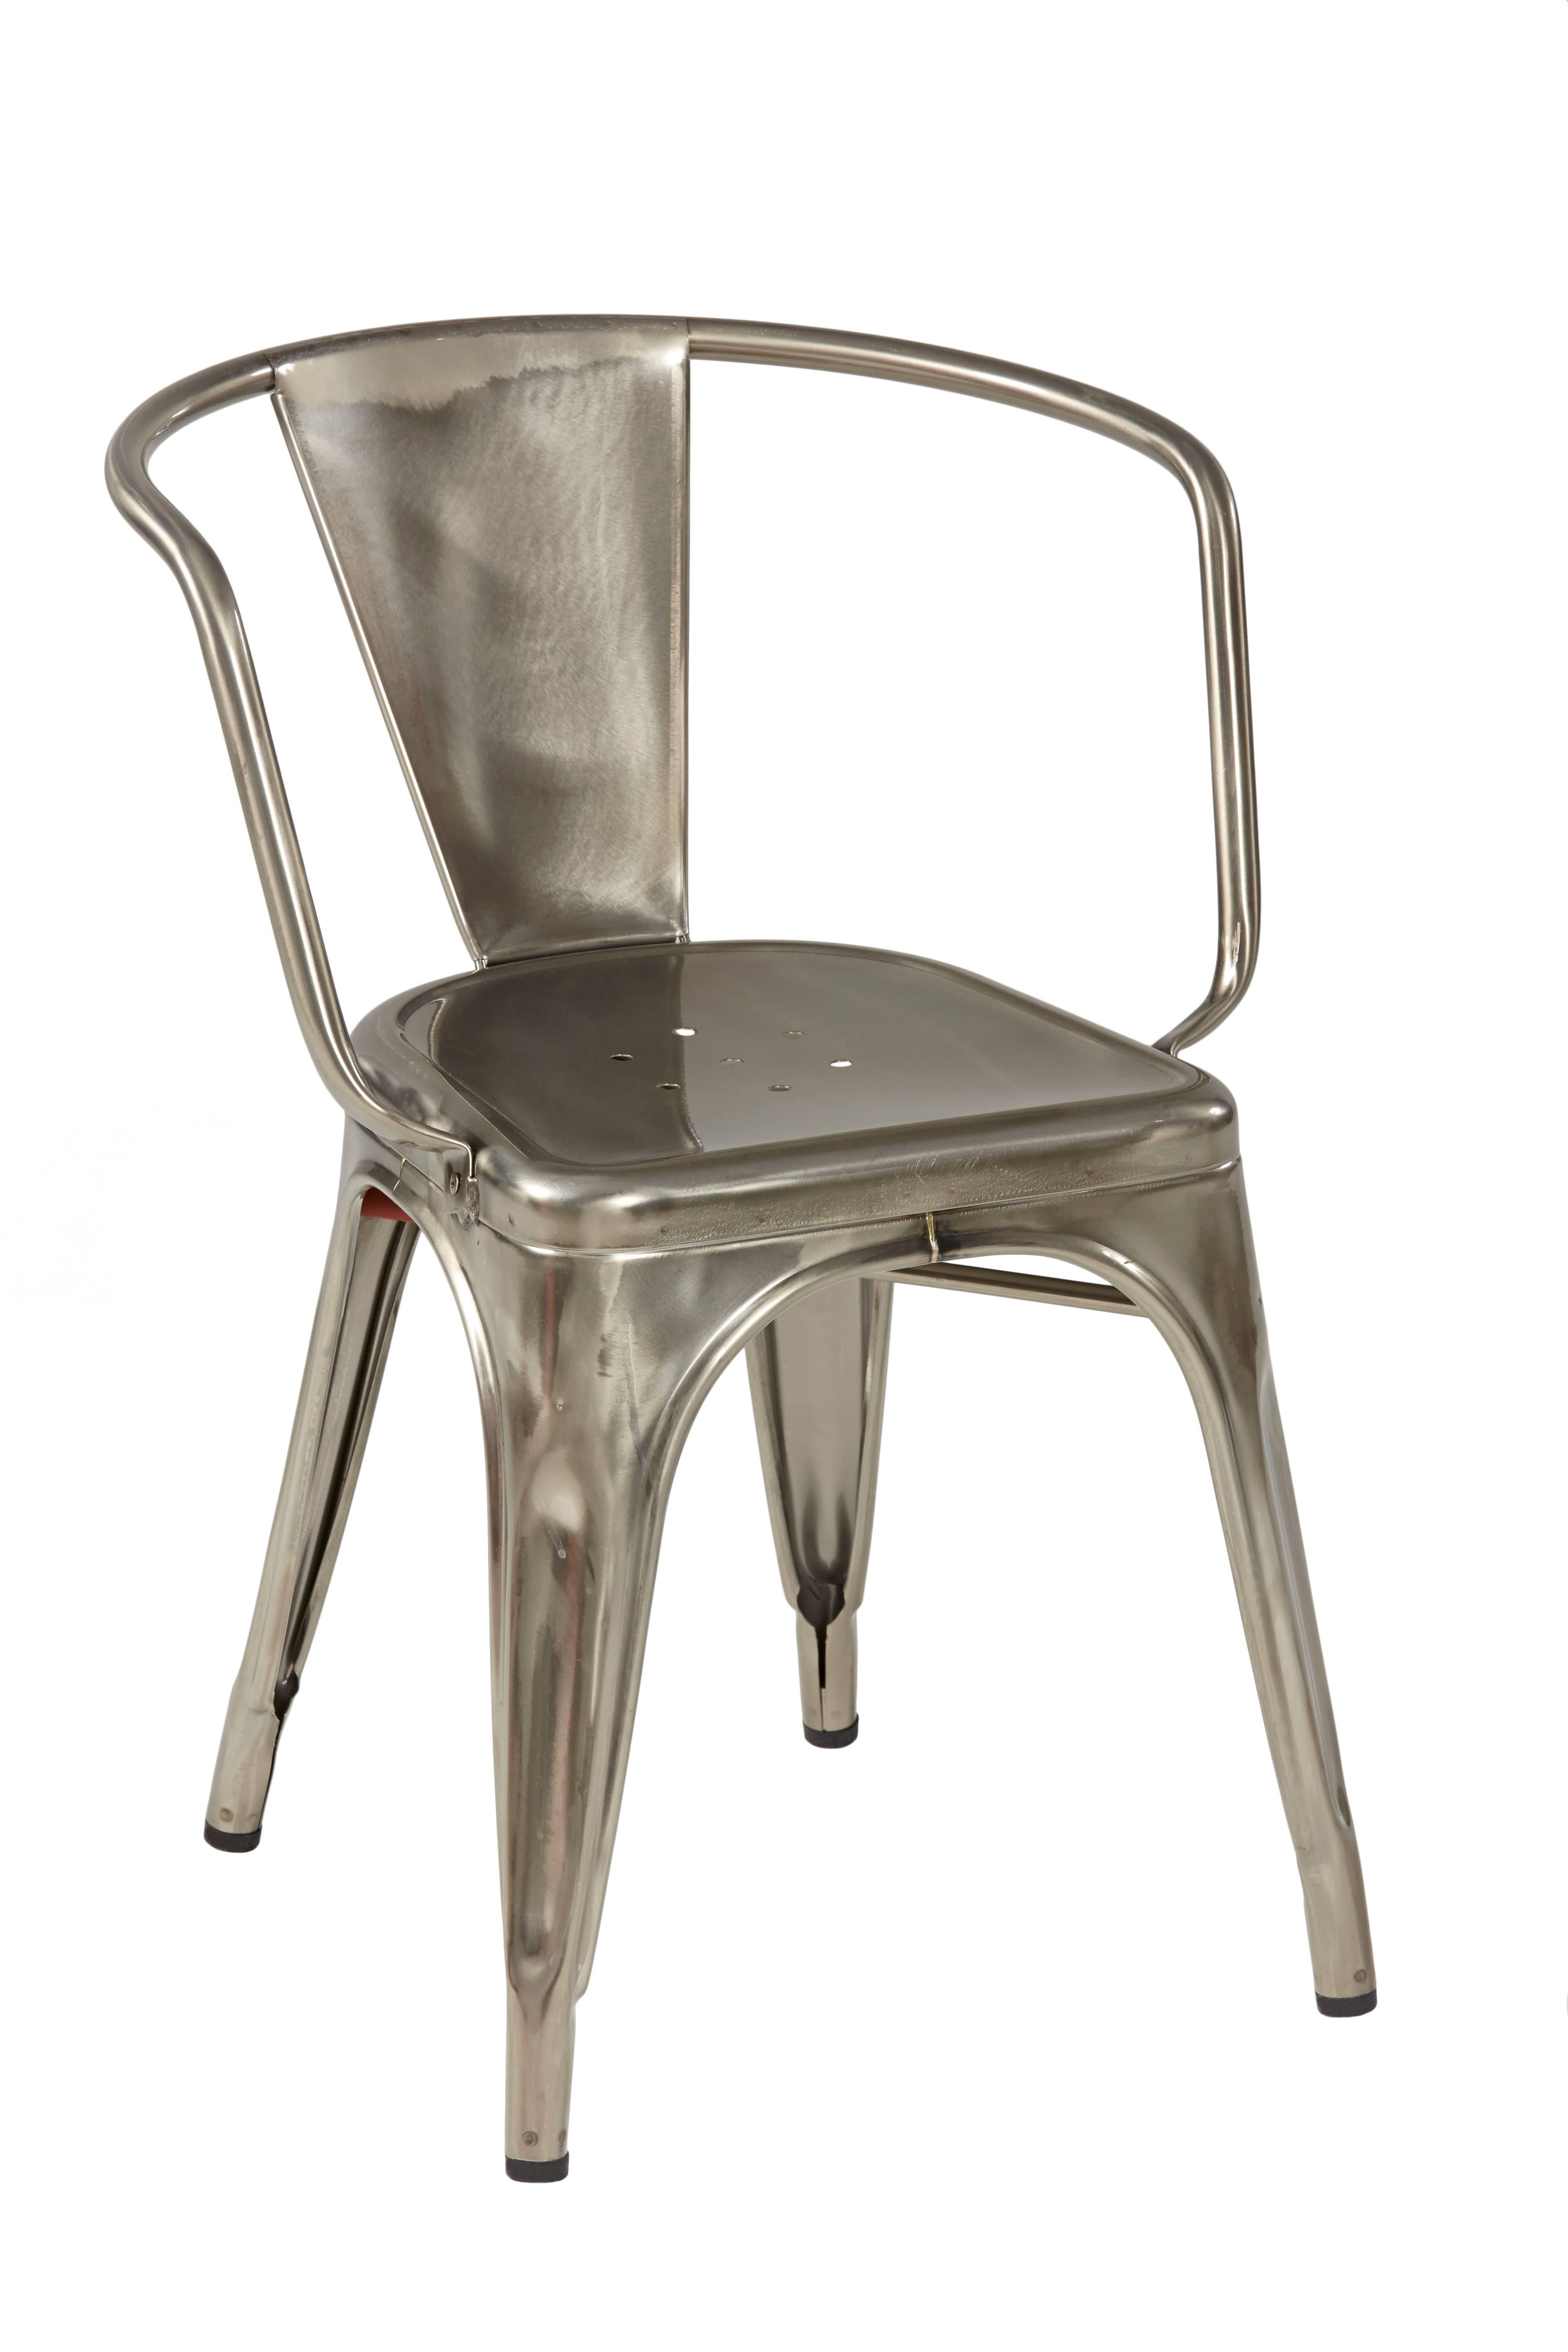 In 1997, Tolix responded to a market demand by adding to its range an armchair with widely spaced armrests: the A97 Armchair was launched. Stackable and very comfortable, it comes in a stainless steel version. The A97 Armchair shows well on a big